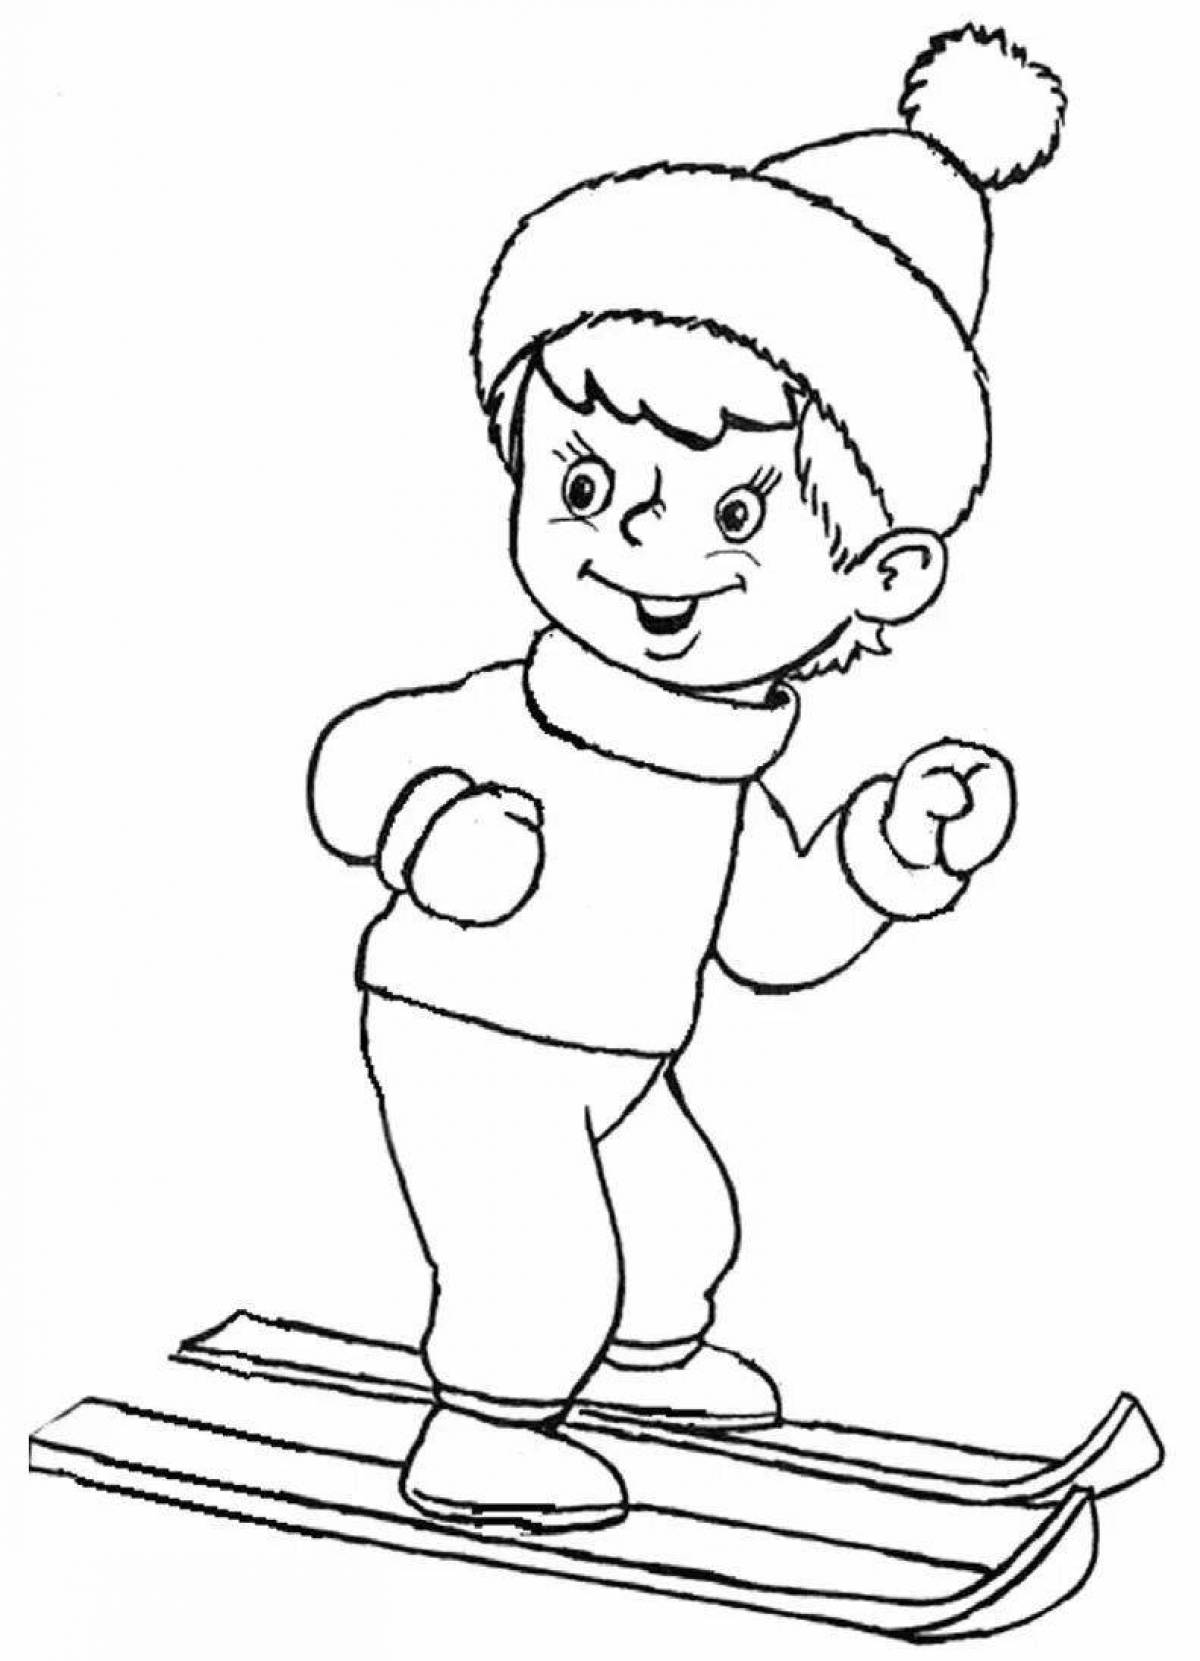 Radiant coloring page boy in winter clothes